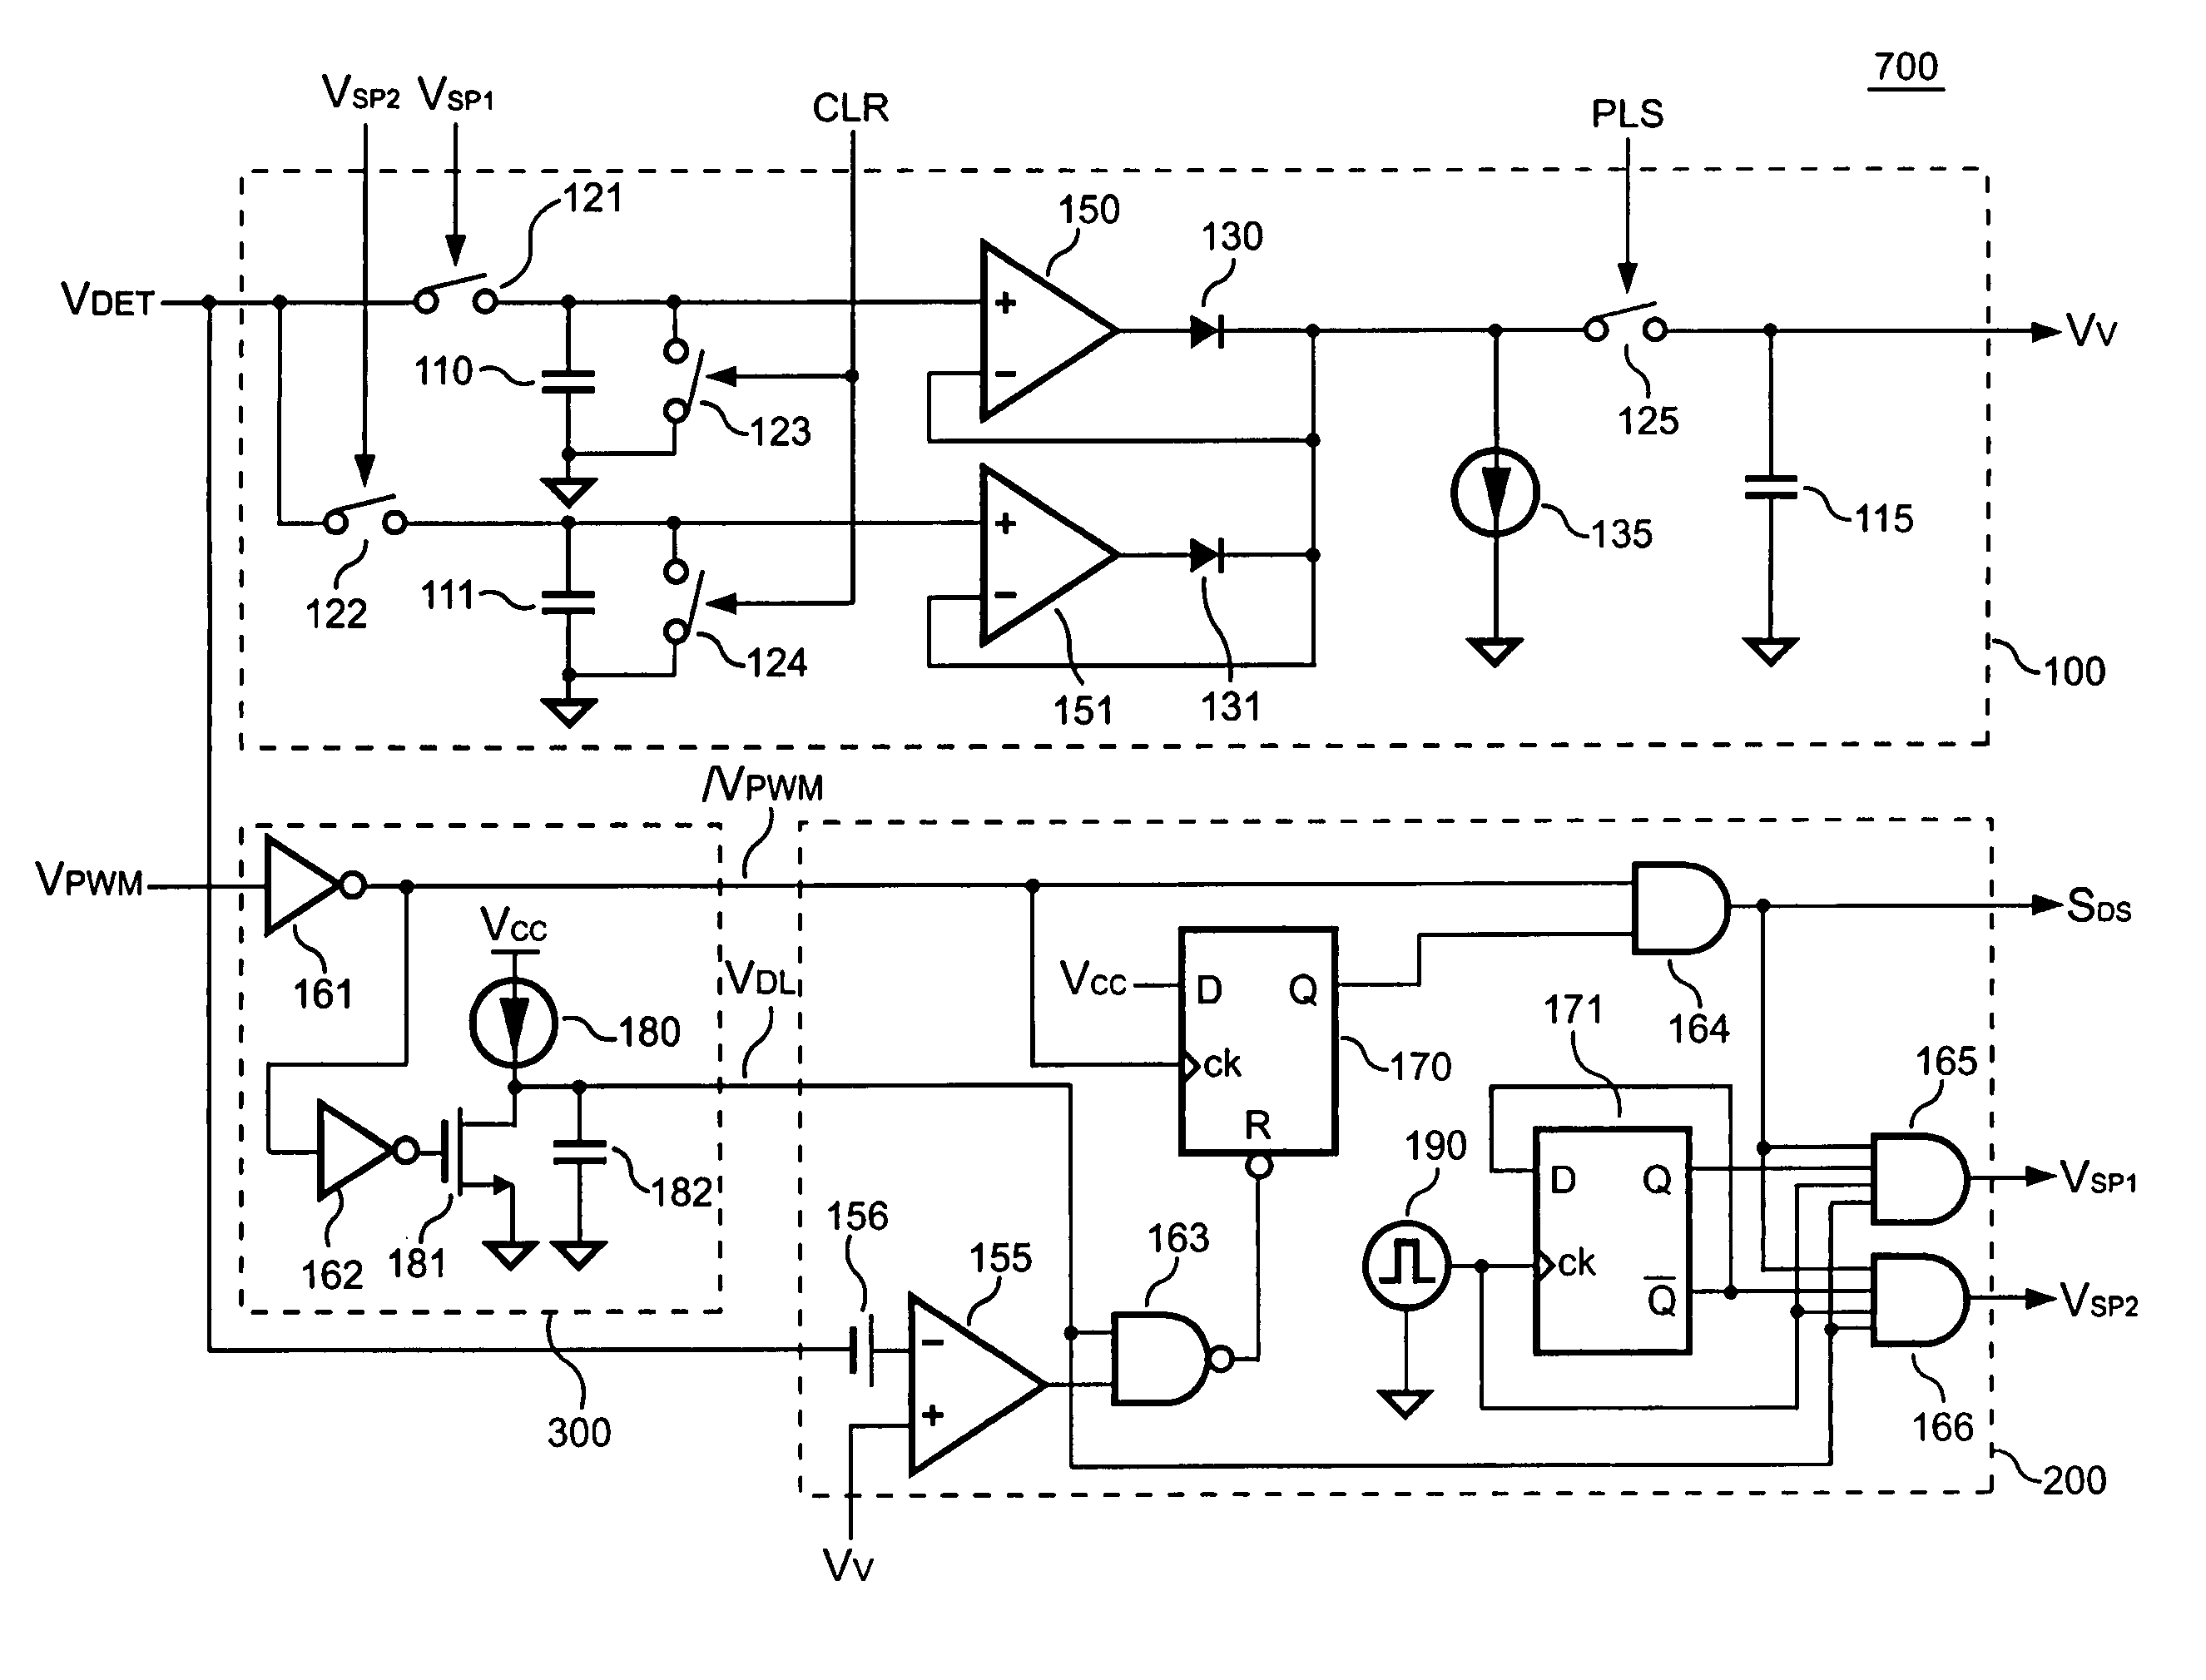 Multiple-sampling circuit for measuring reflected voltage and discharge time of a transformer